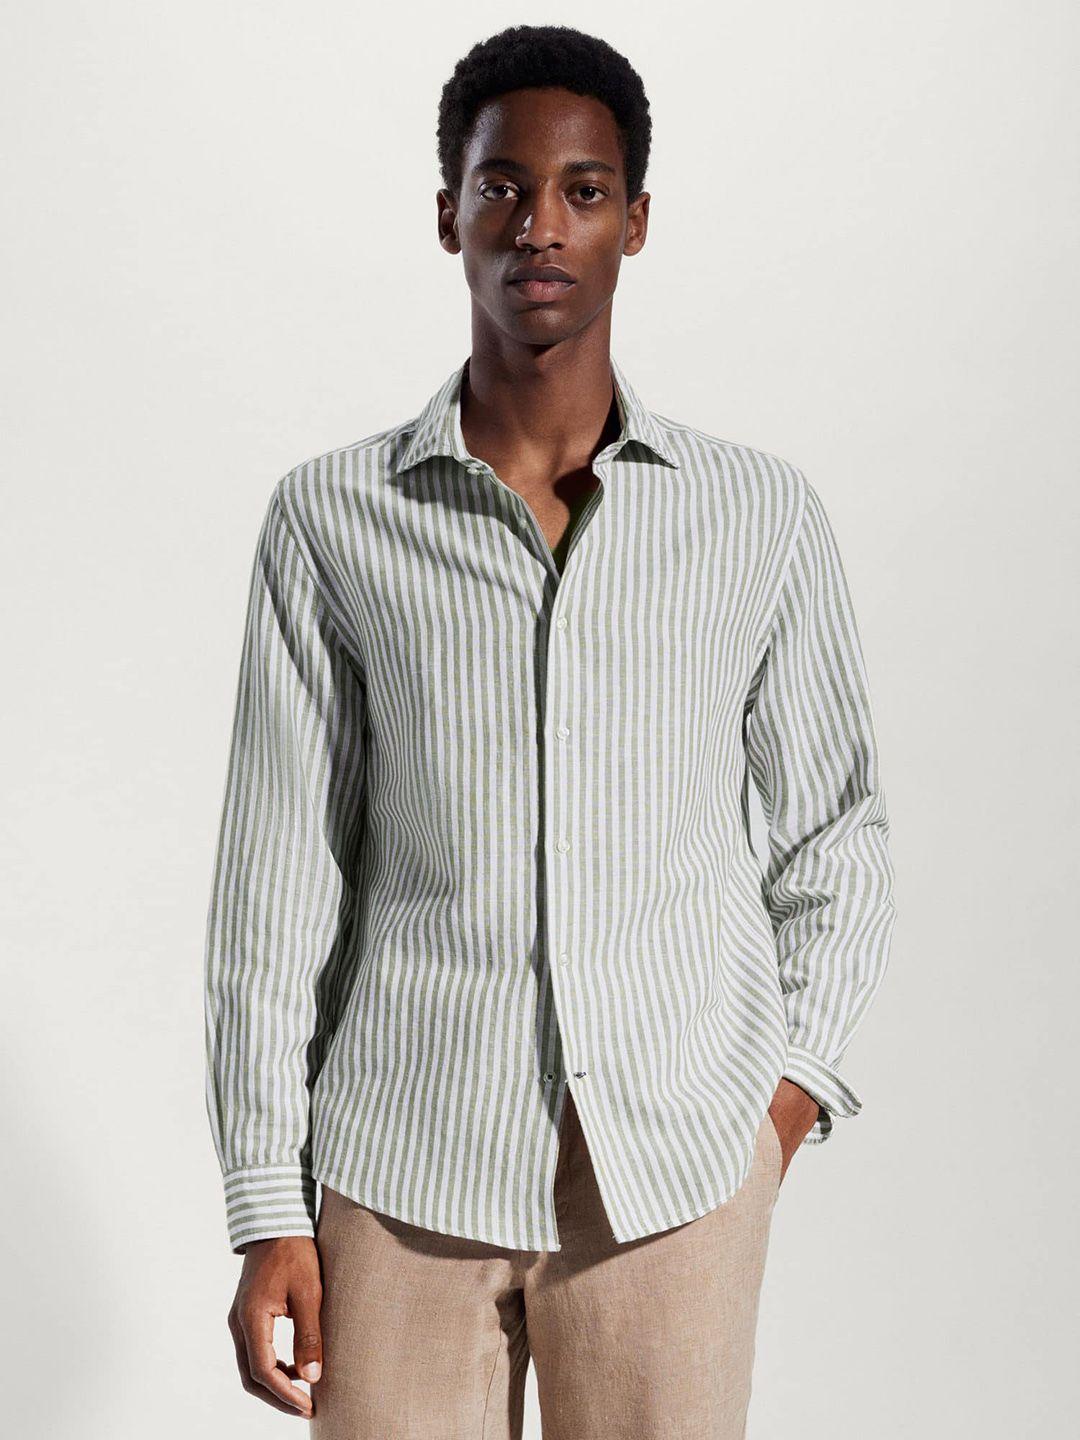 mango-man-slim-fit-linen-cotton-striped-sustainable-casual-shirt